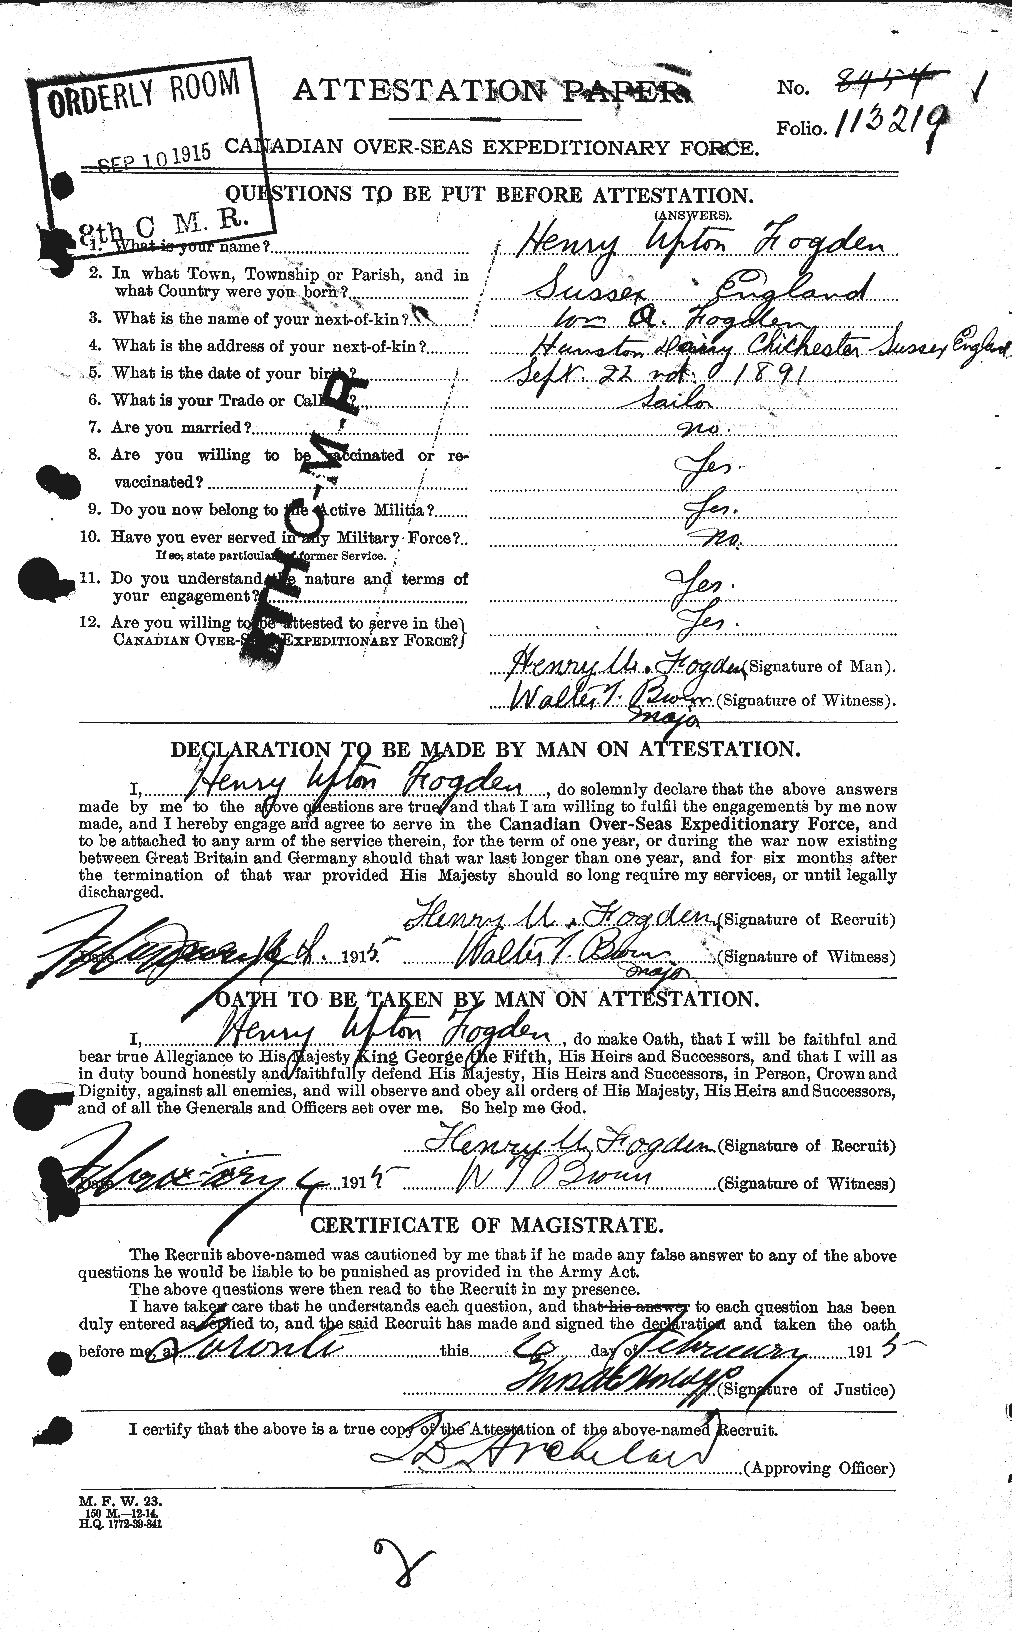 Personnel Records of the First World War - CEF 328026a